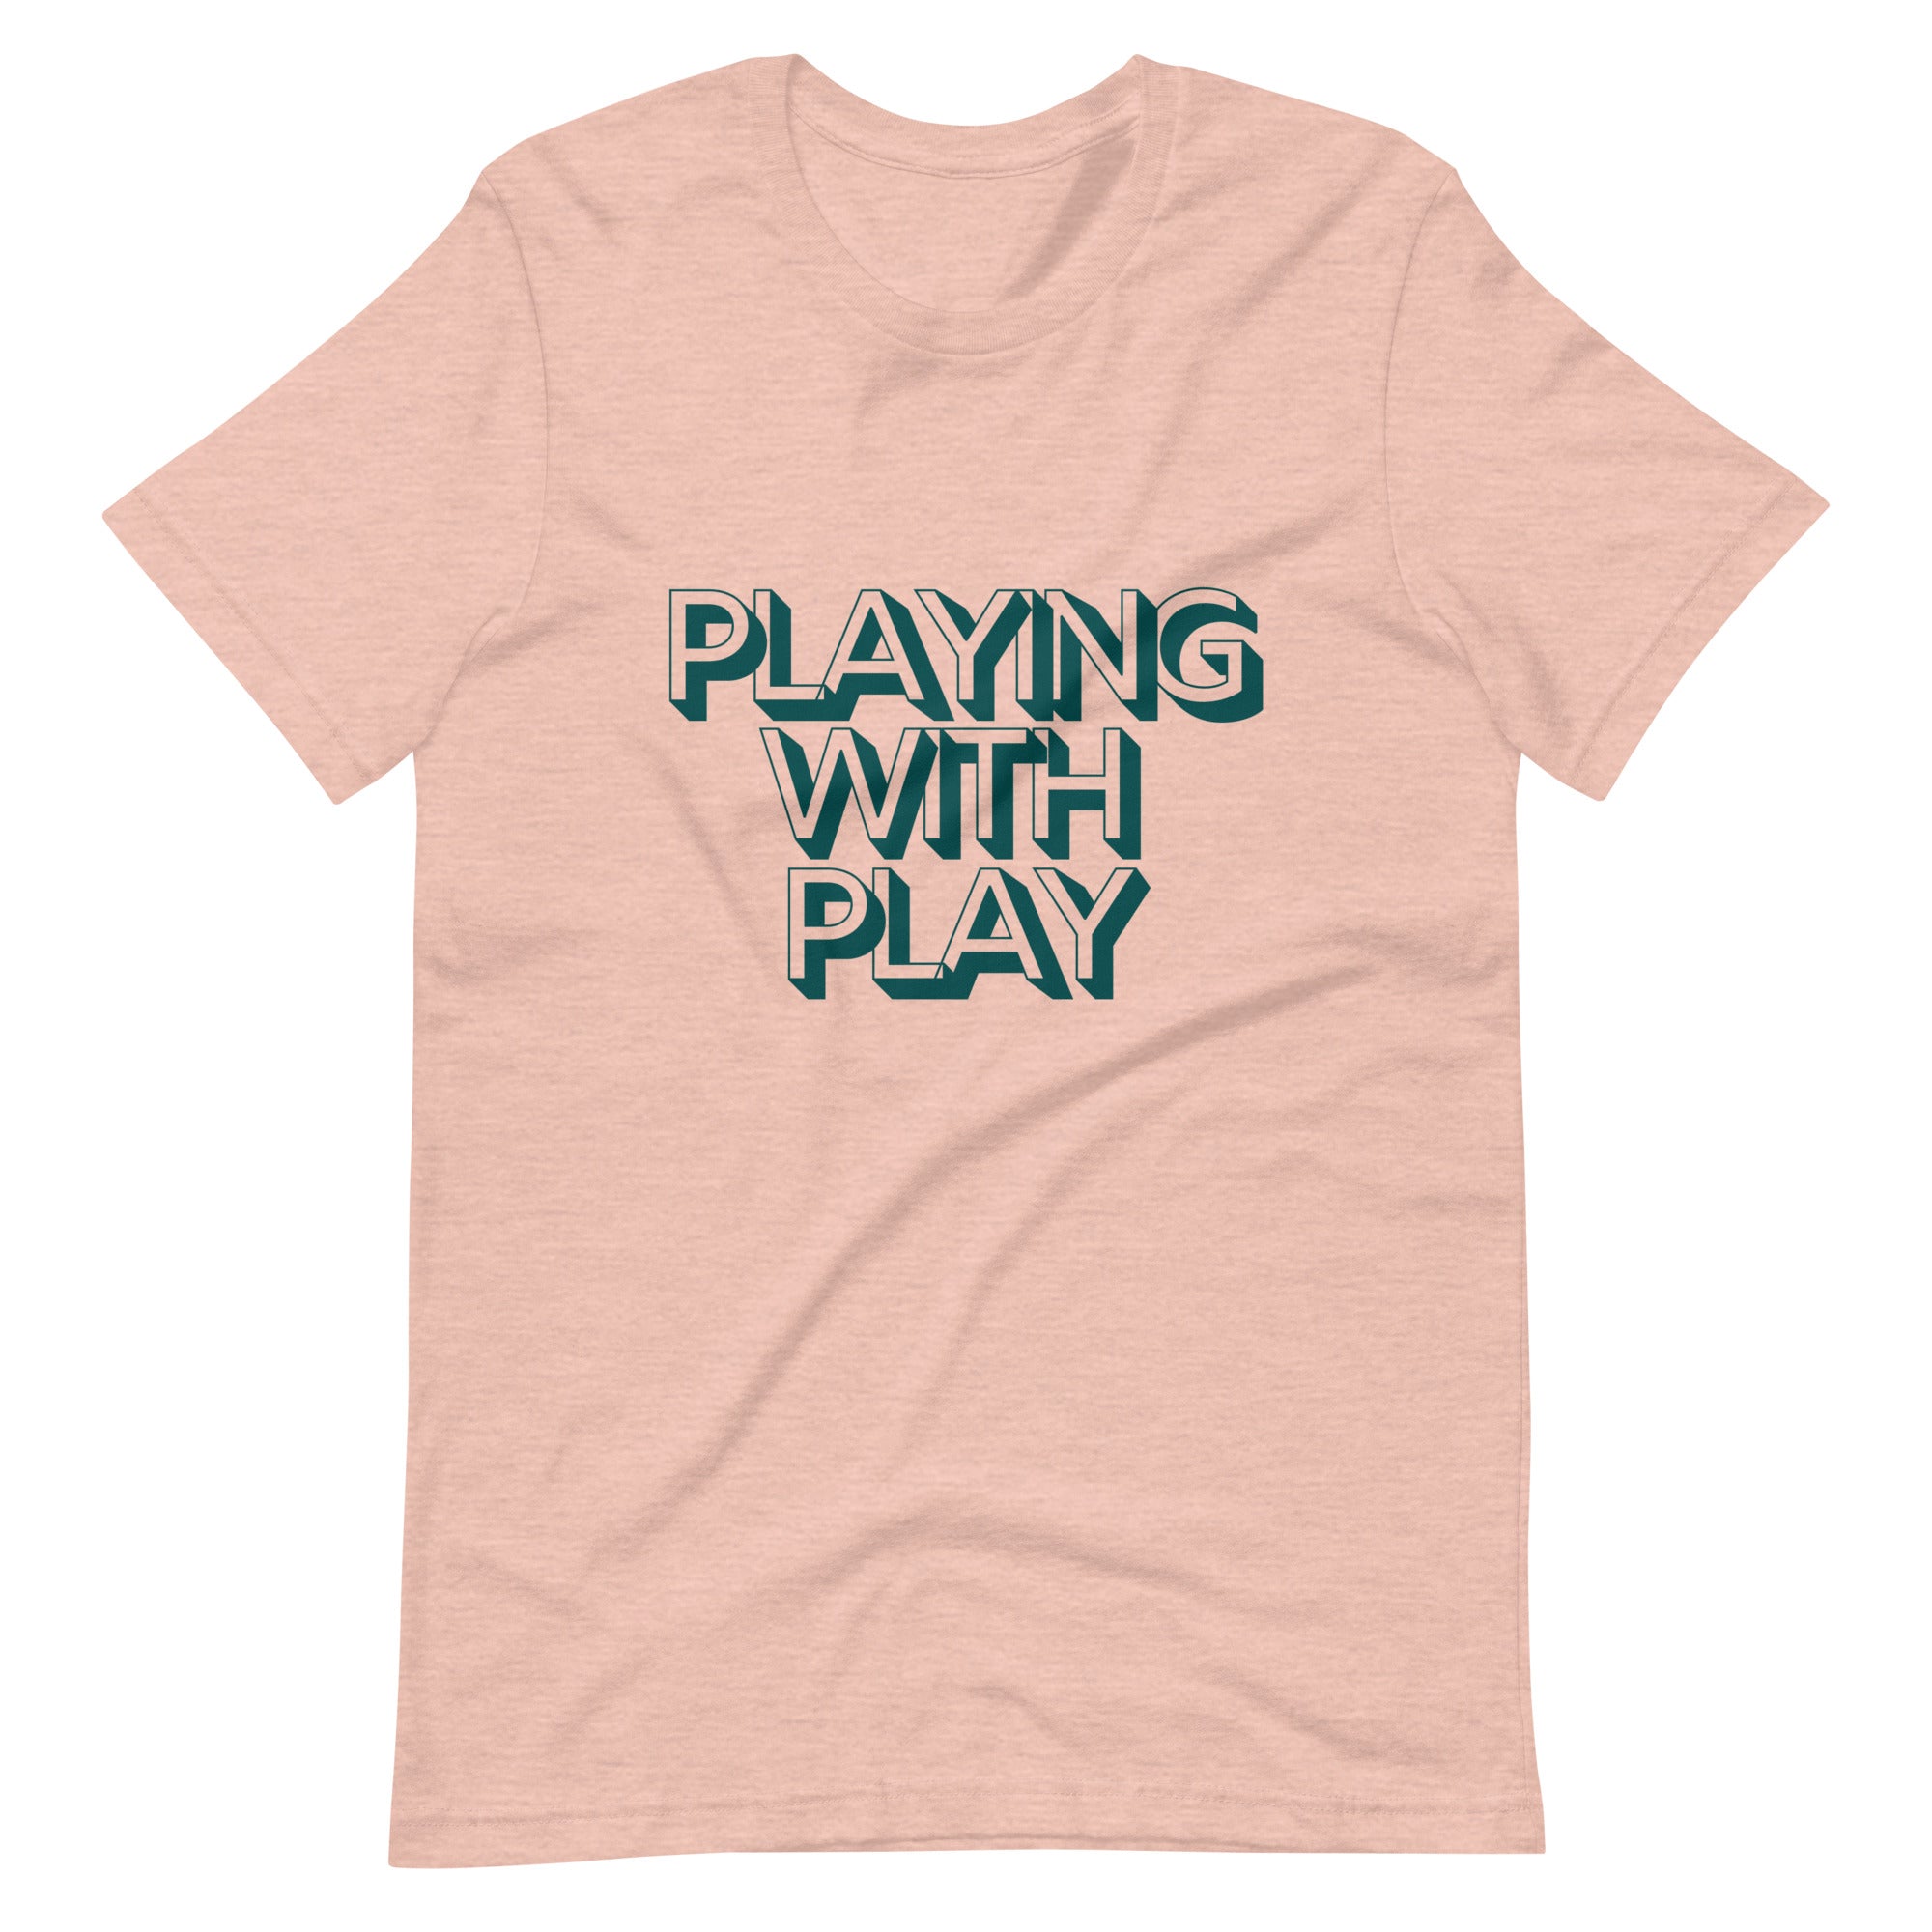 Playing With Play T-Shirt (Gender Neutral)